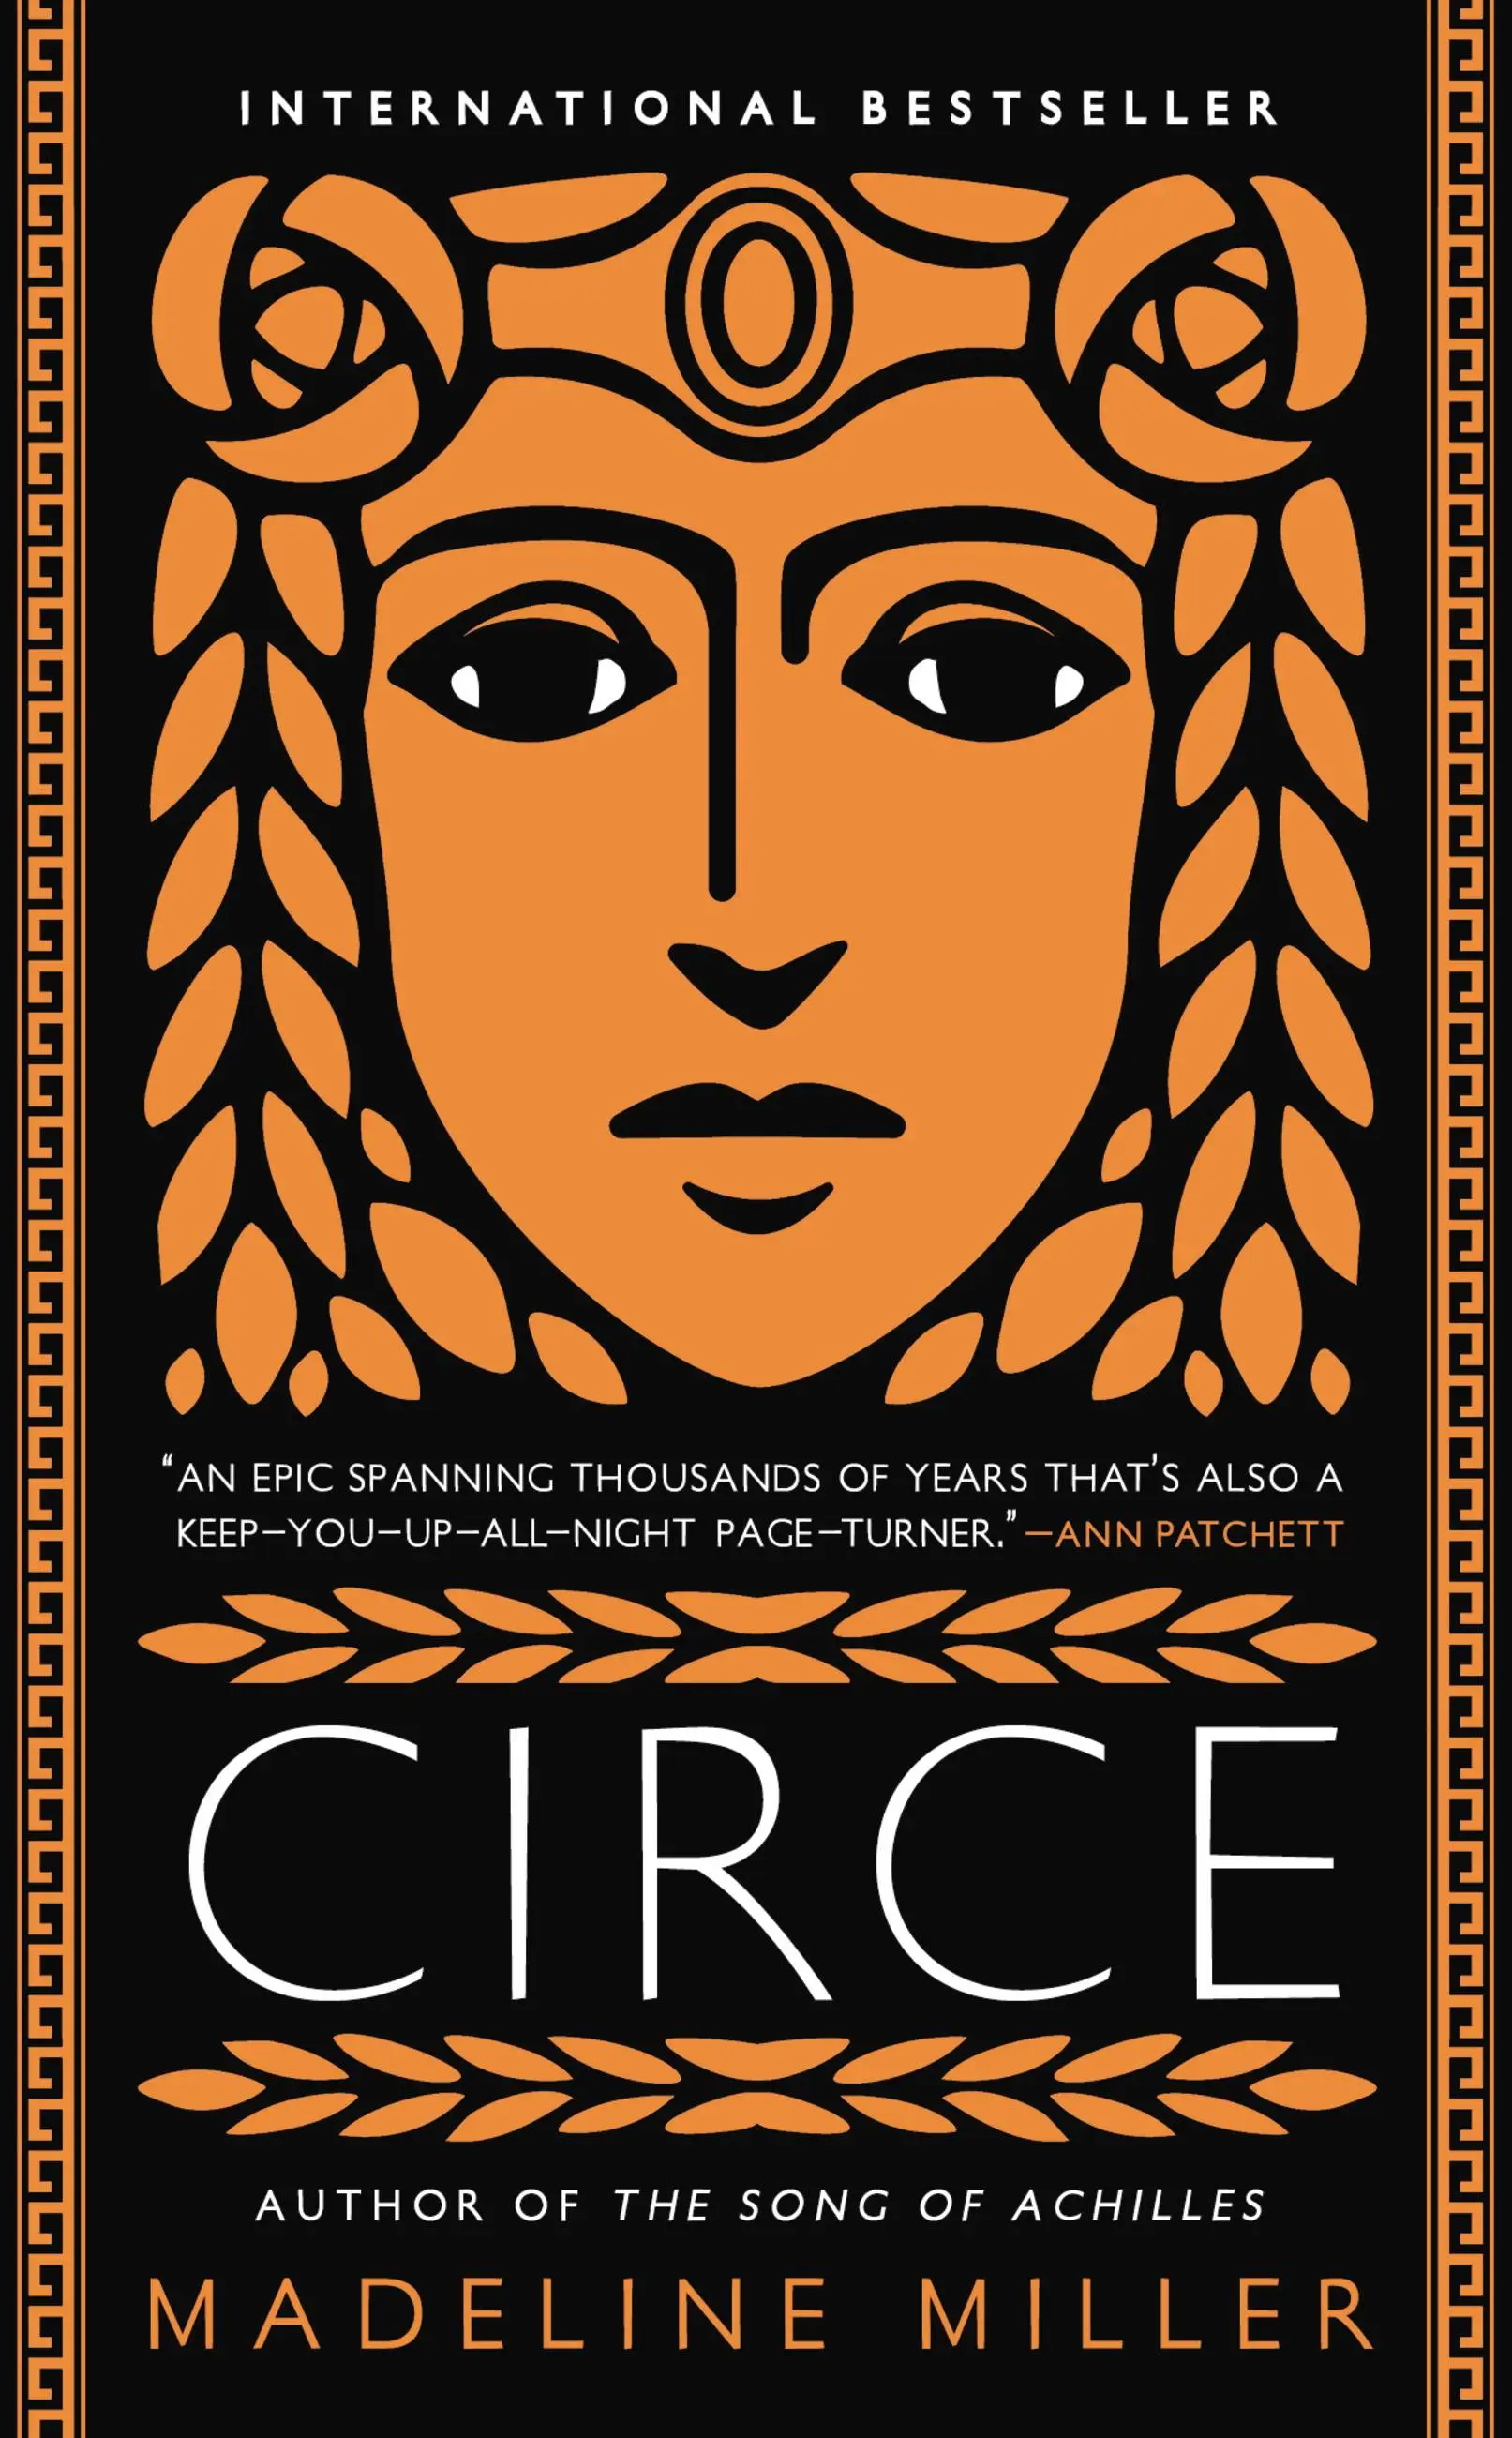 Book cover for Madeline Miller's Circe depicting a Grecian-style woman's face in orange on a black background.